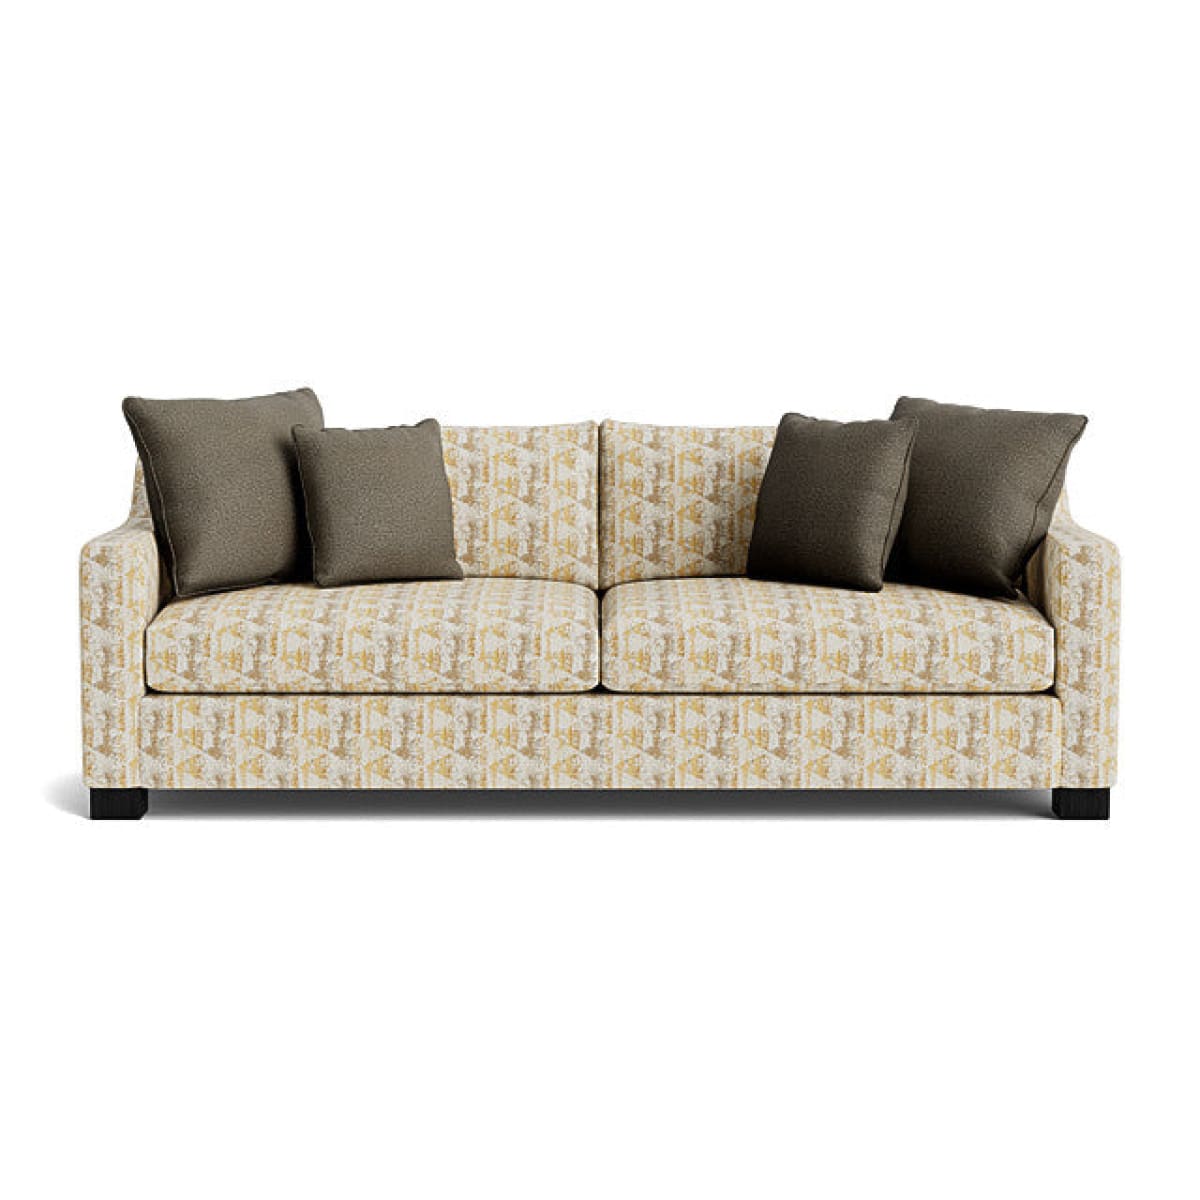 Ewing Sofa - Sectional - Voyager Buttercup